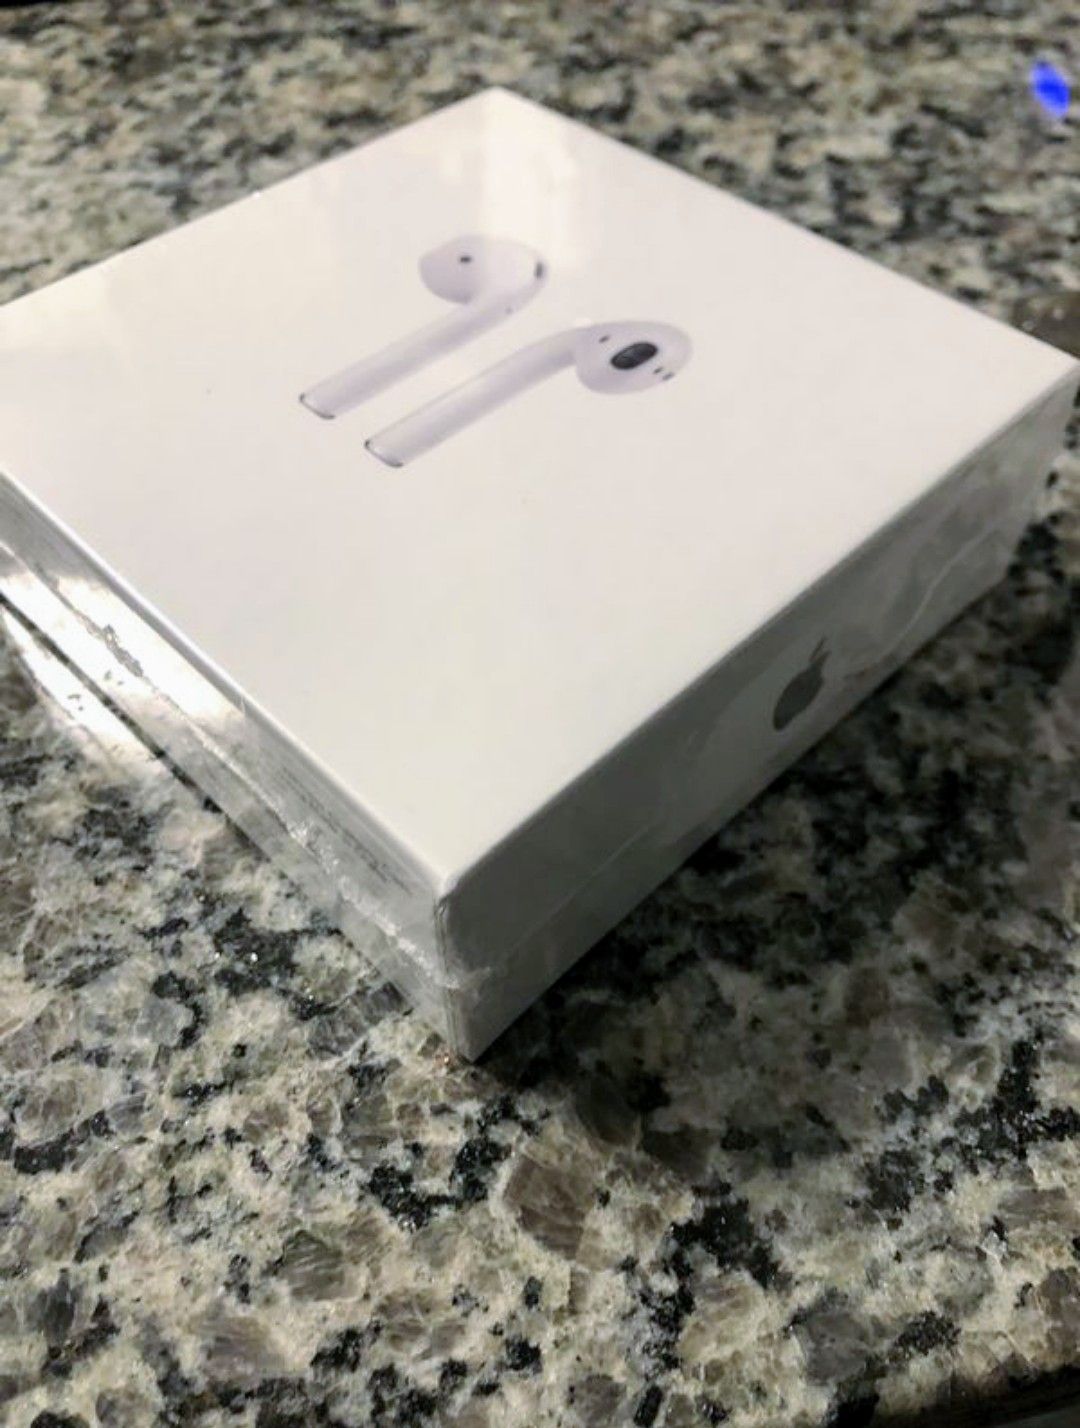 Apple Airpods 2nd Generation (NEW)